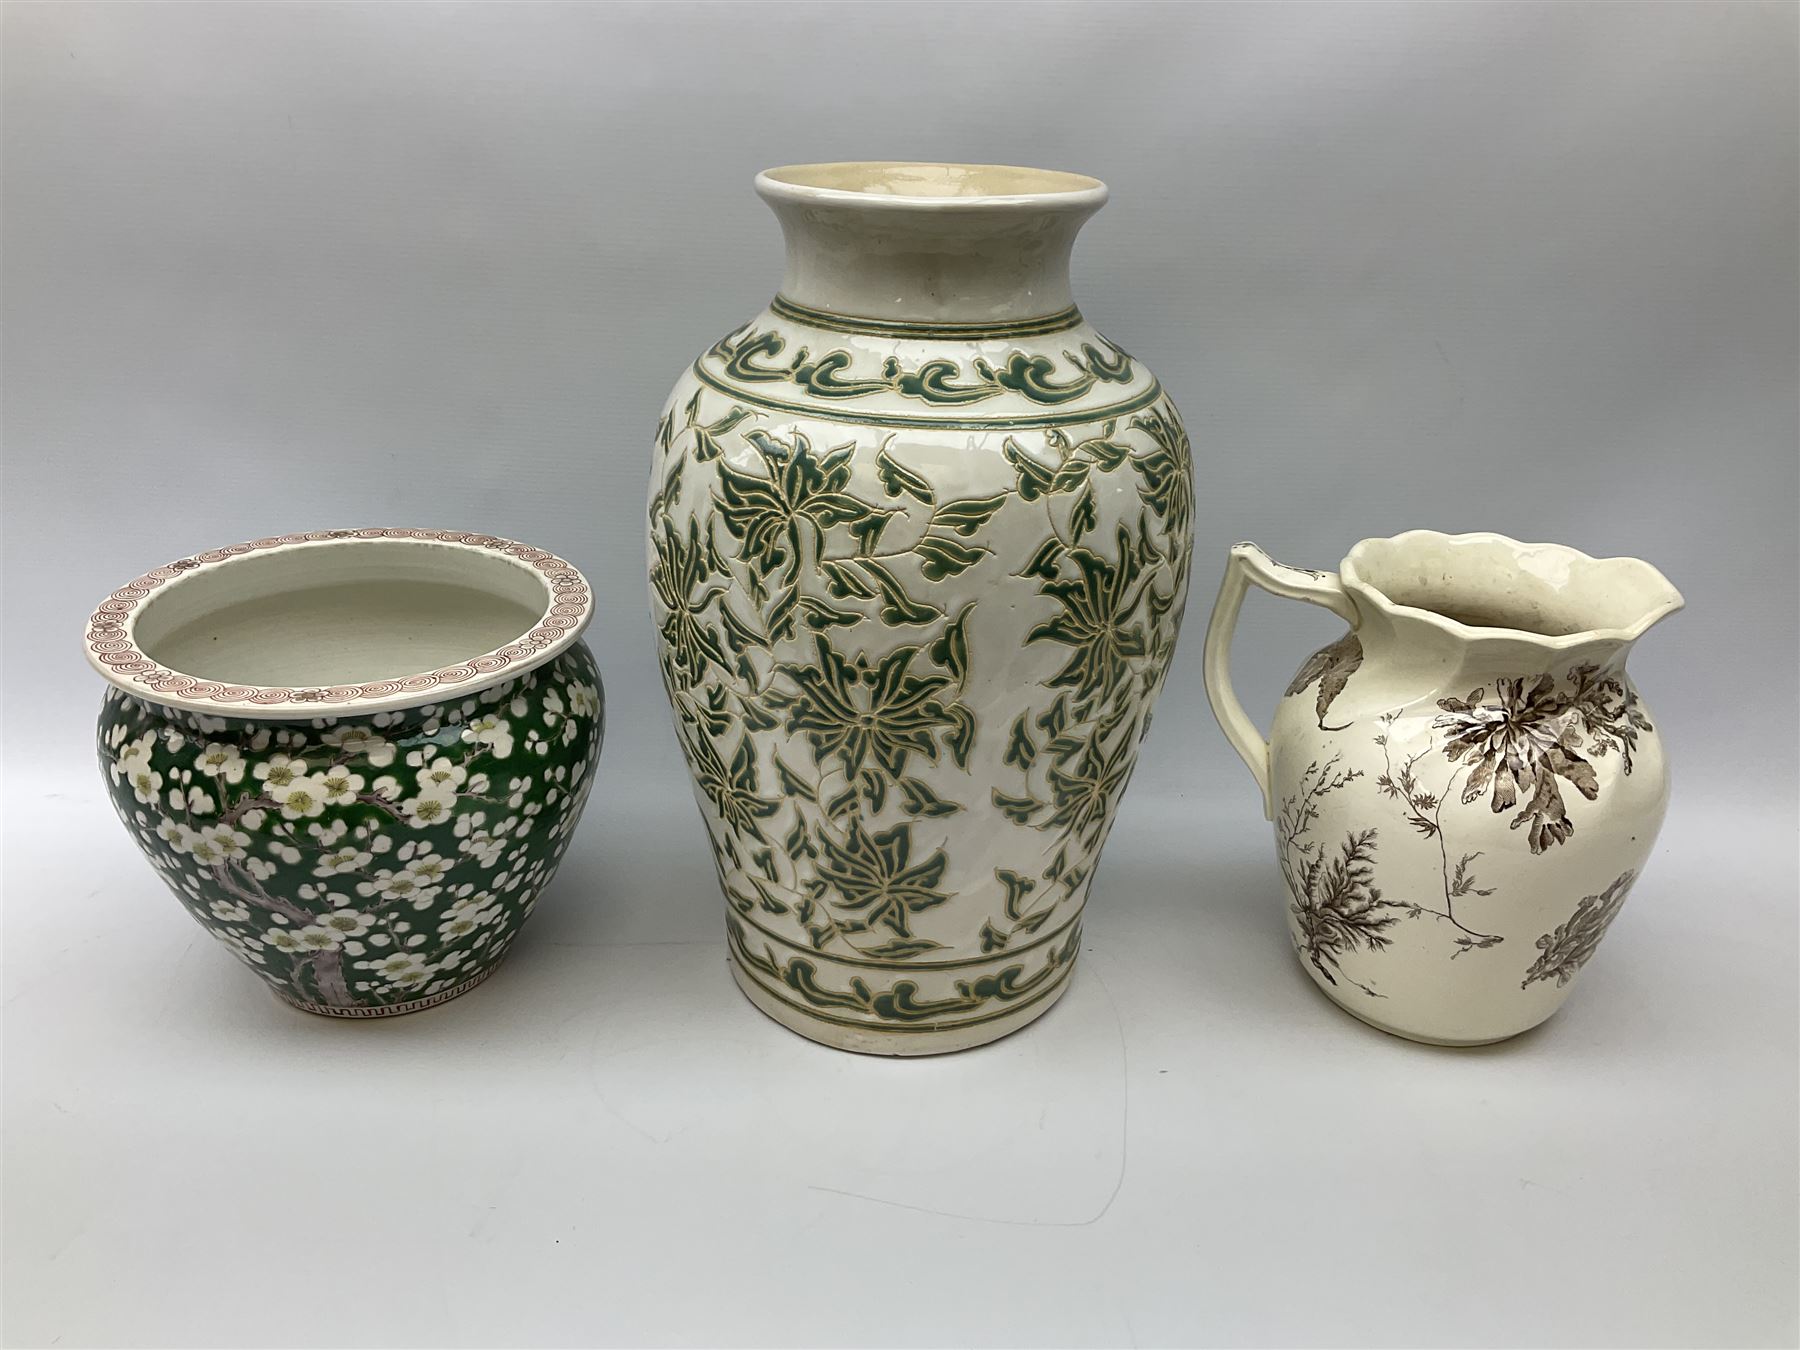 Large stoneware vase of baluster form decorated with green foliate design on white ground - Image 3 of 5